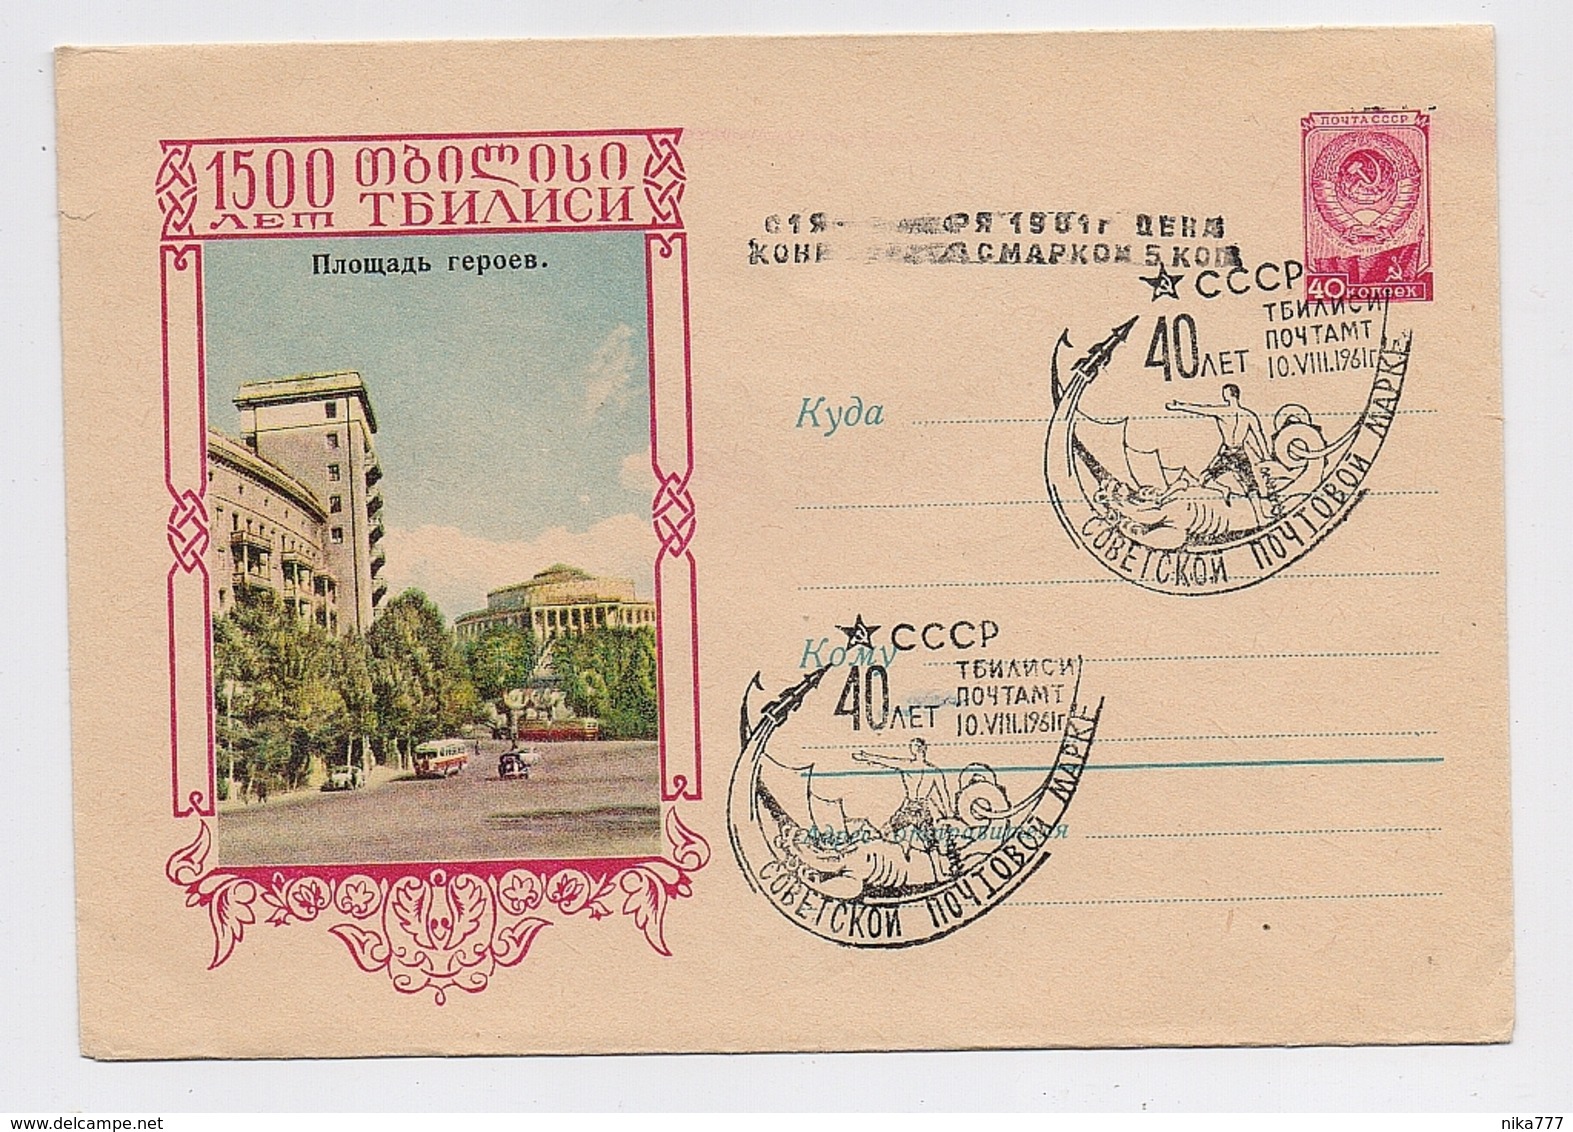 Stationery Used 1958 Cover USSR RUSSIA Architecture Tbilisi Georgia Caucasus Space Rocket OVERPRINT - 1950-59